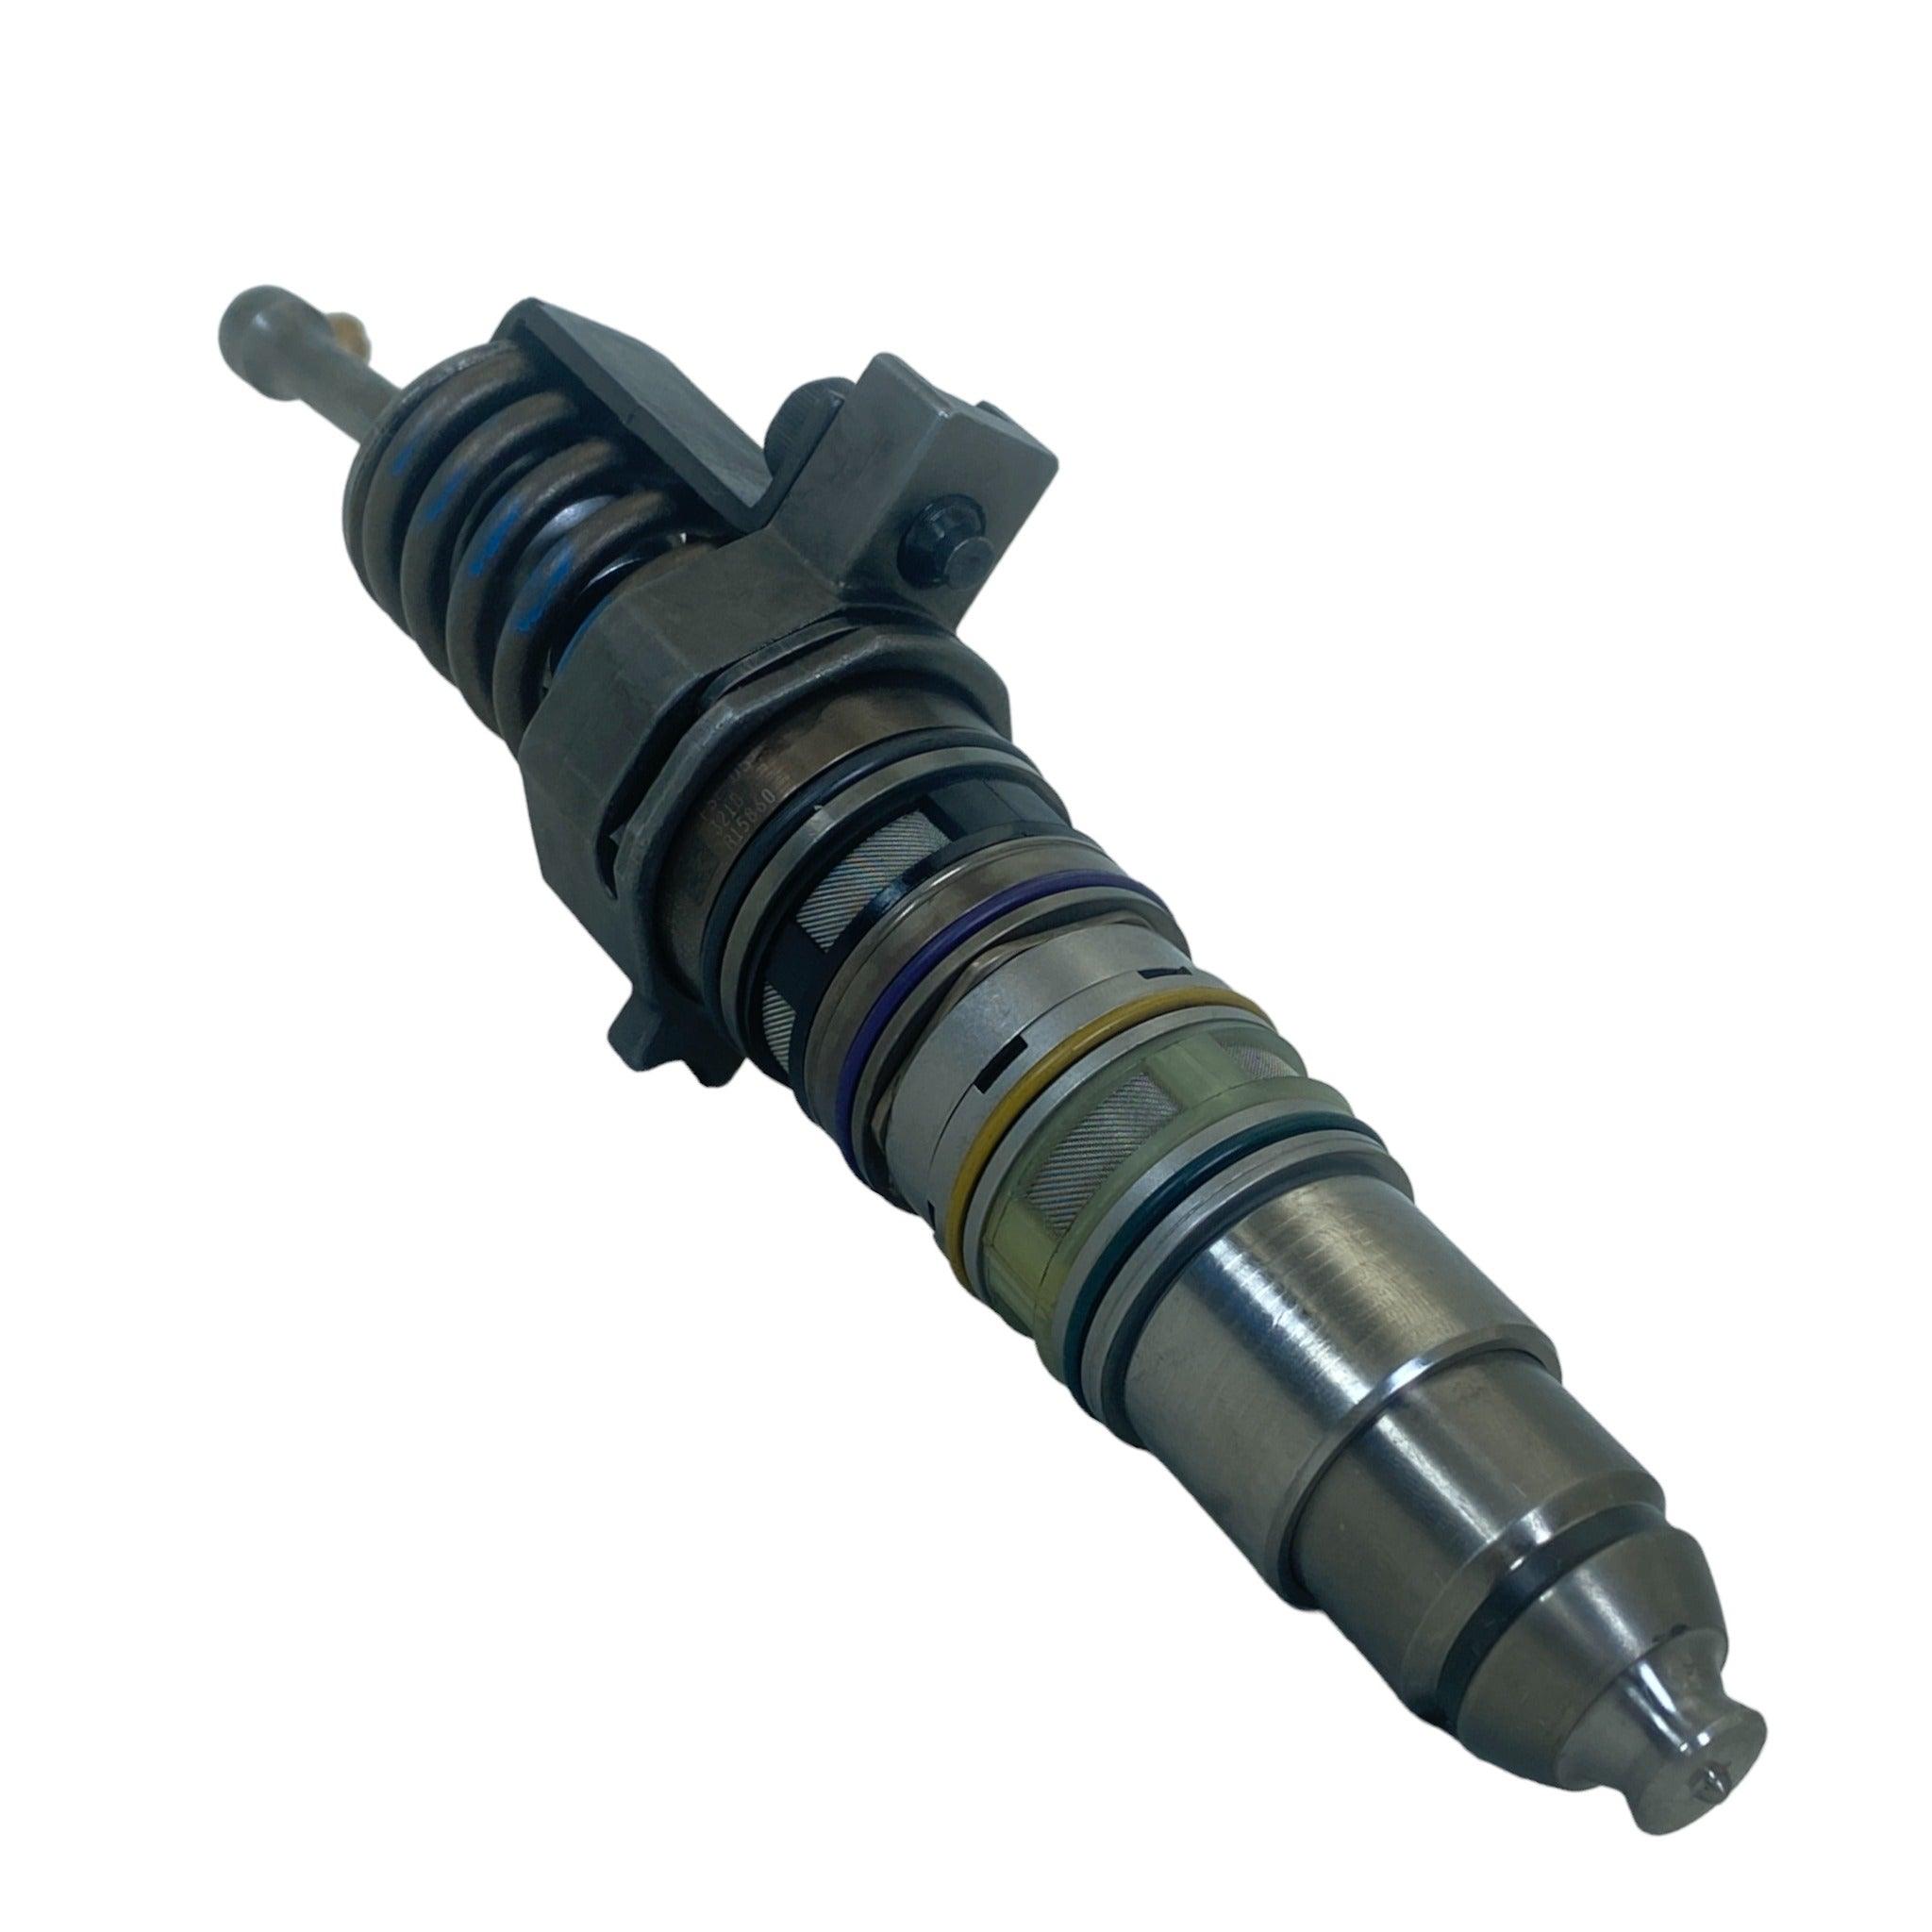 4088665PX Genuine Cummins Fuel Injector For ISX - ADVANCED TRUCK PARTS